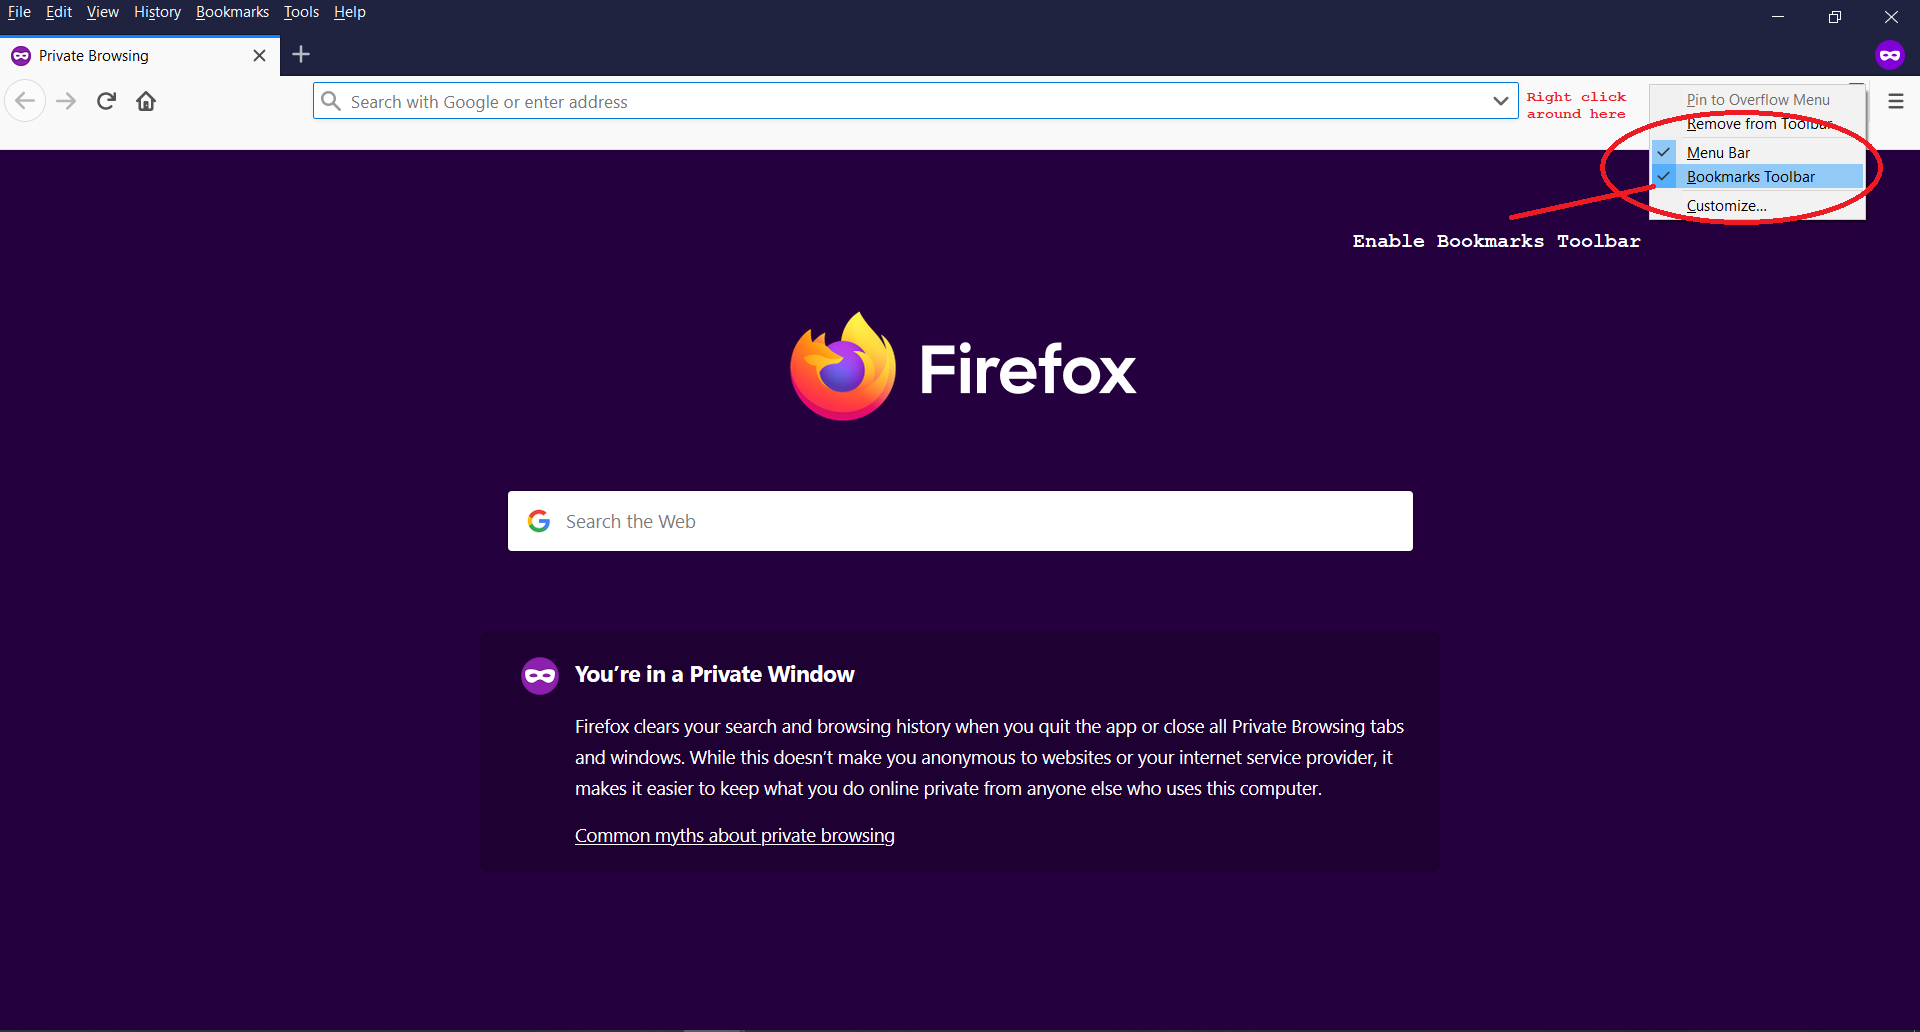 1. Enable the Bookmarks Toolbar in Firefox